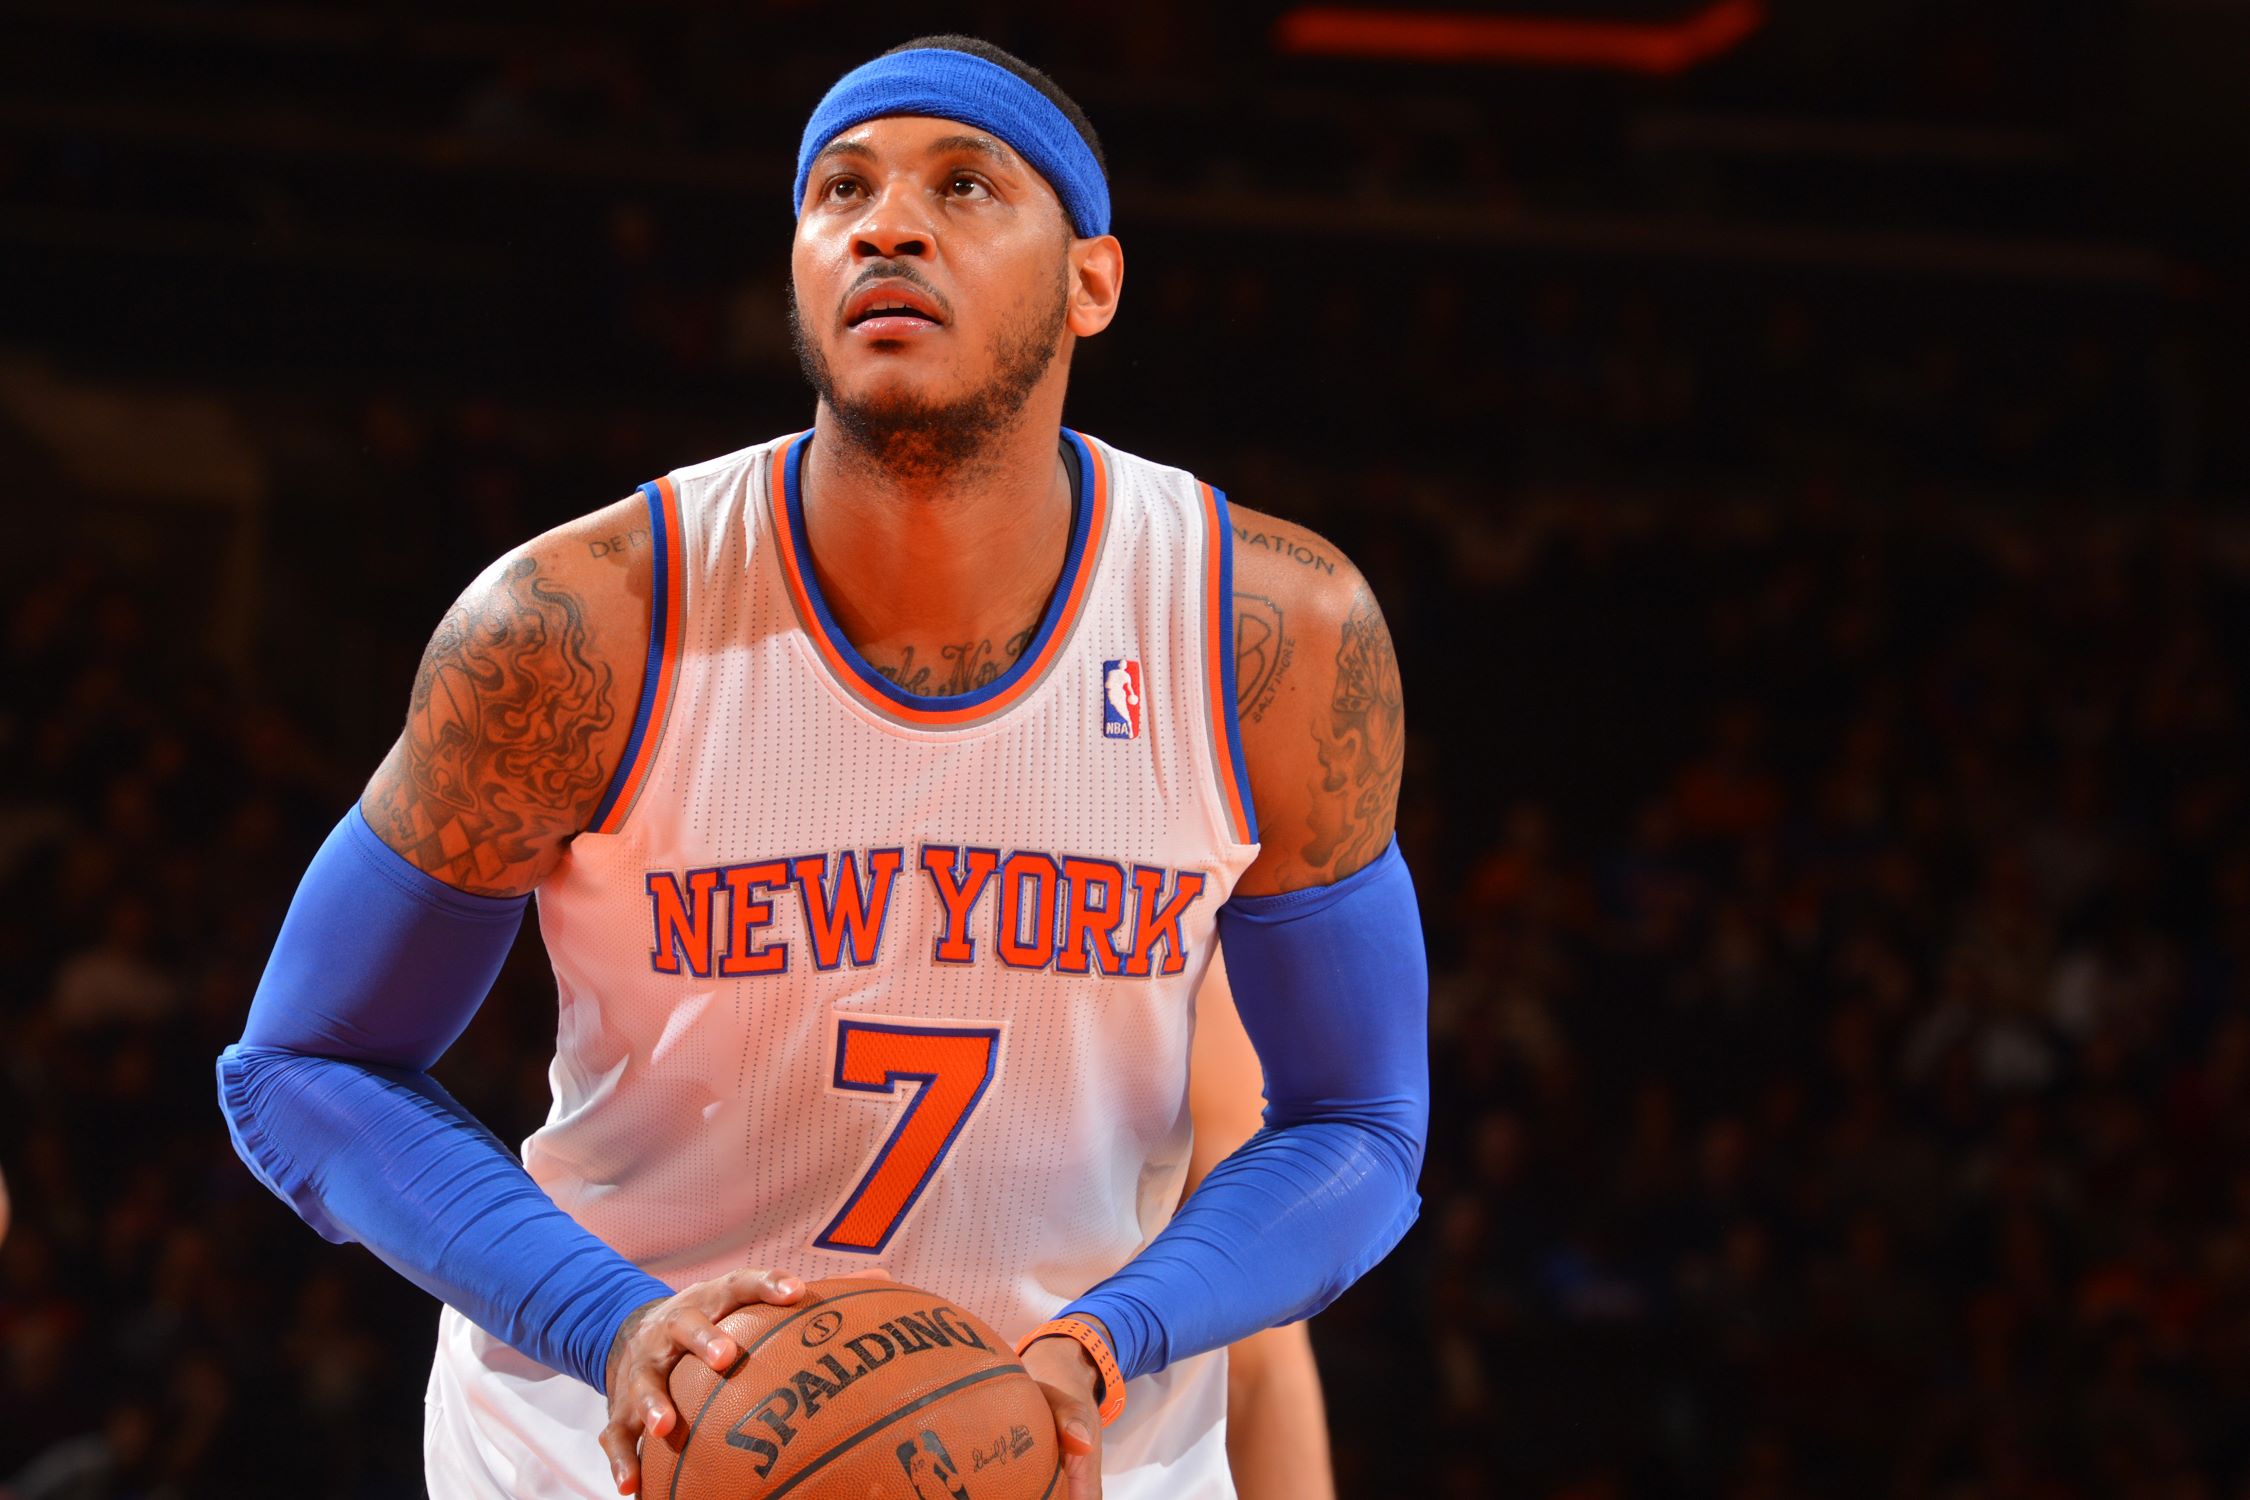 15 Astounding Facts About Carmelo Anthony